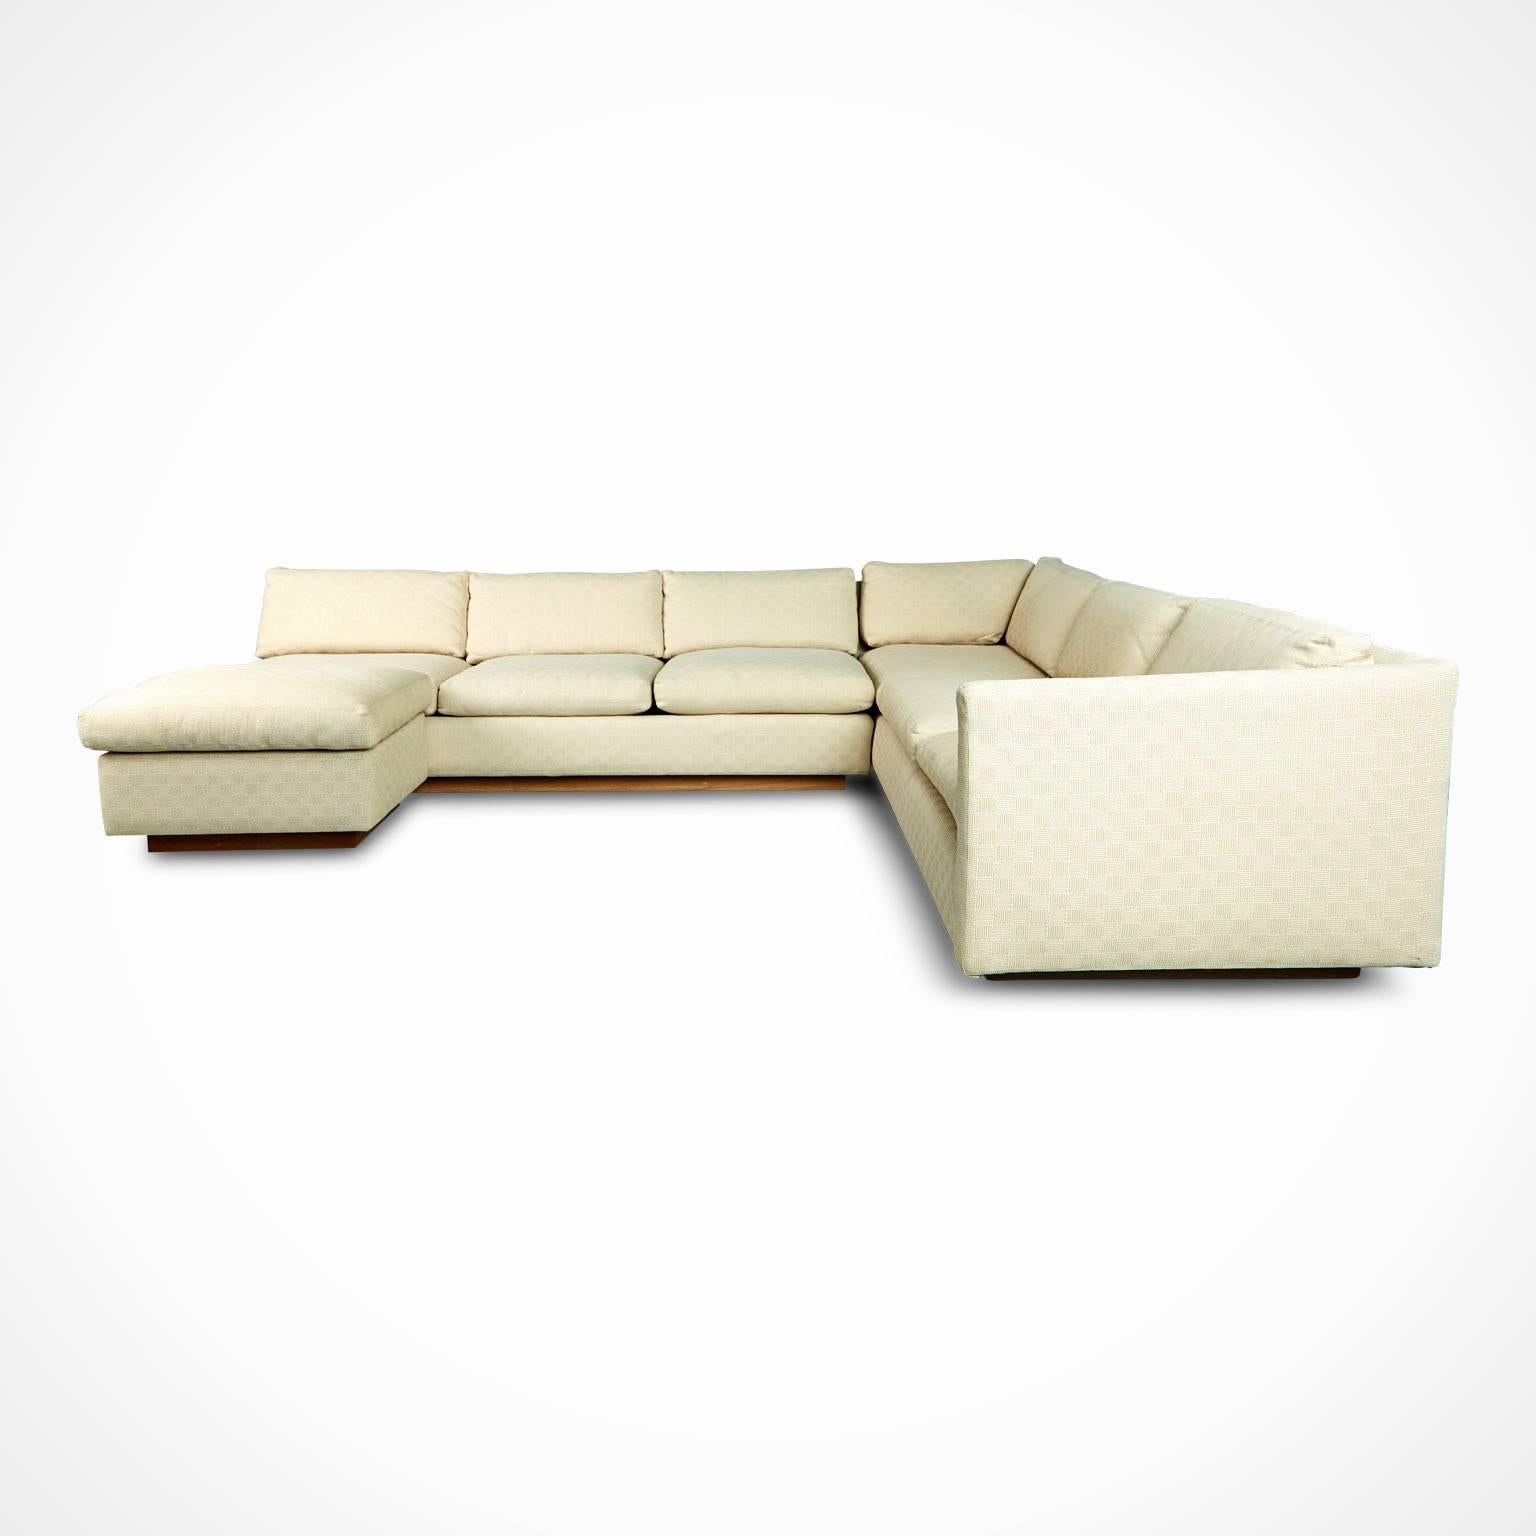 Mid-Century Modern Milo Baughman Sectional Sofa and Ottoman for Thayer Coggin, Signed & Dated 1976